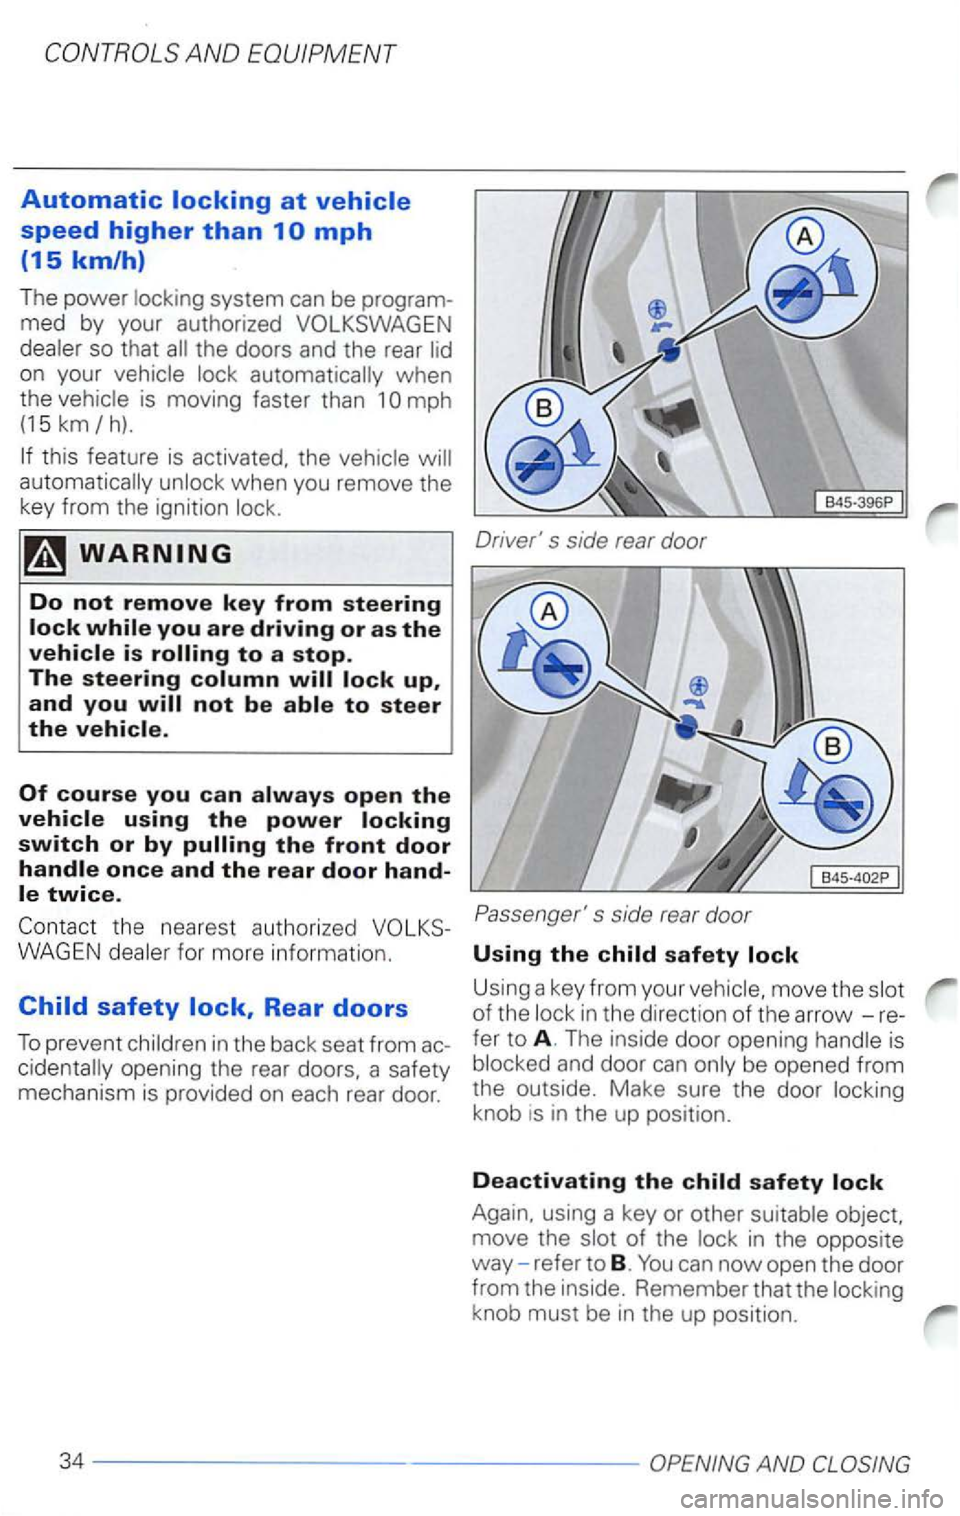 VOLKSWAGEN PASSAT 2003  Owners Manual the doors  and the rear 
when 
t h e 
is  moving  faster than 1 
in  the  back  seat from 
move  the 
knob  is  in  the  up pos ition. 
Deactivating the child s afety lock 
Again.  using a key  or oth